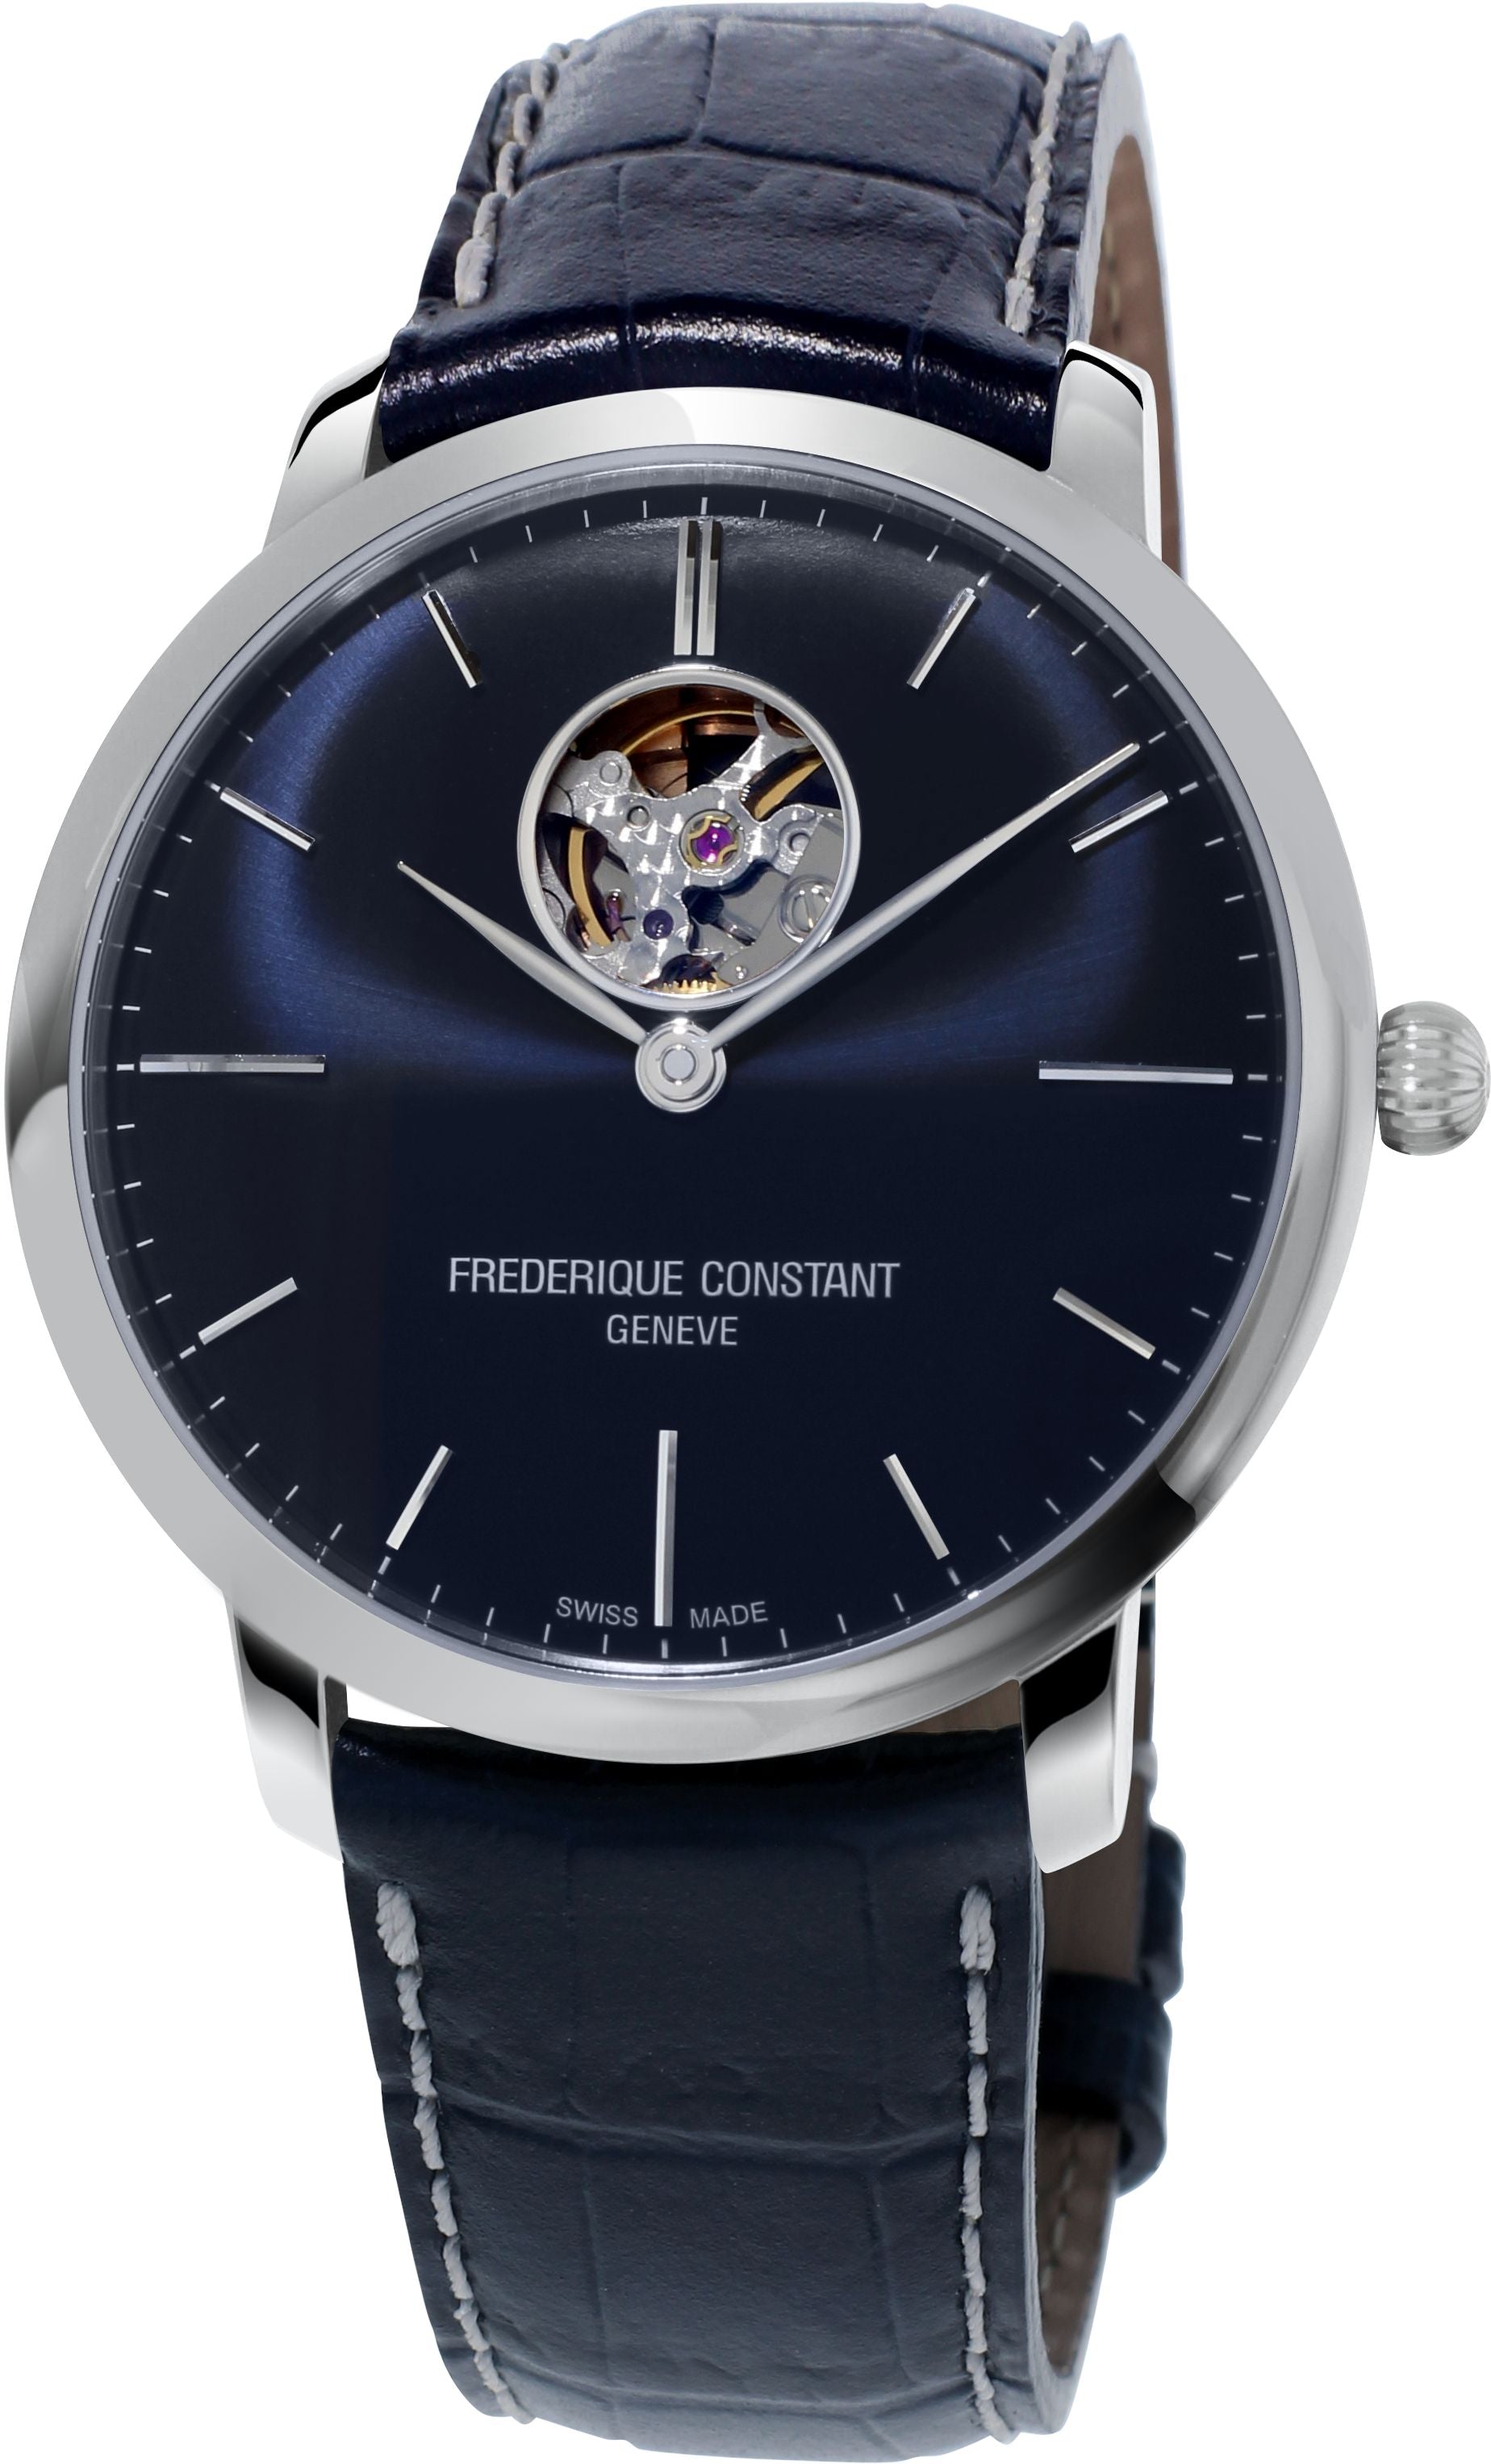 FREDERIQUE CONSTANT MENS STAINLESS STEEL Silver-Tone Automatic SLIMLINE Leather Strap